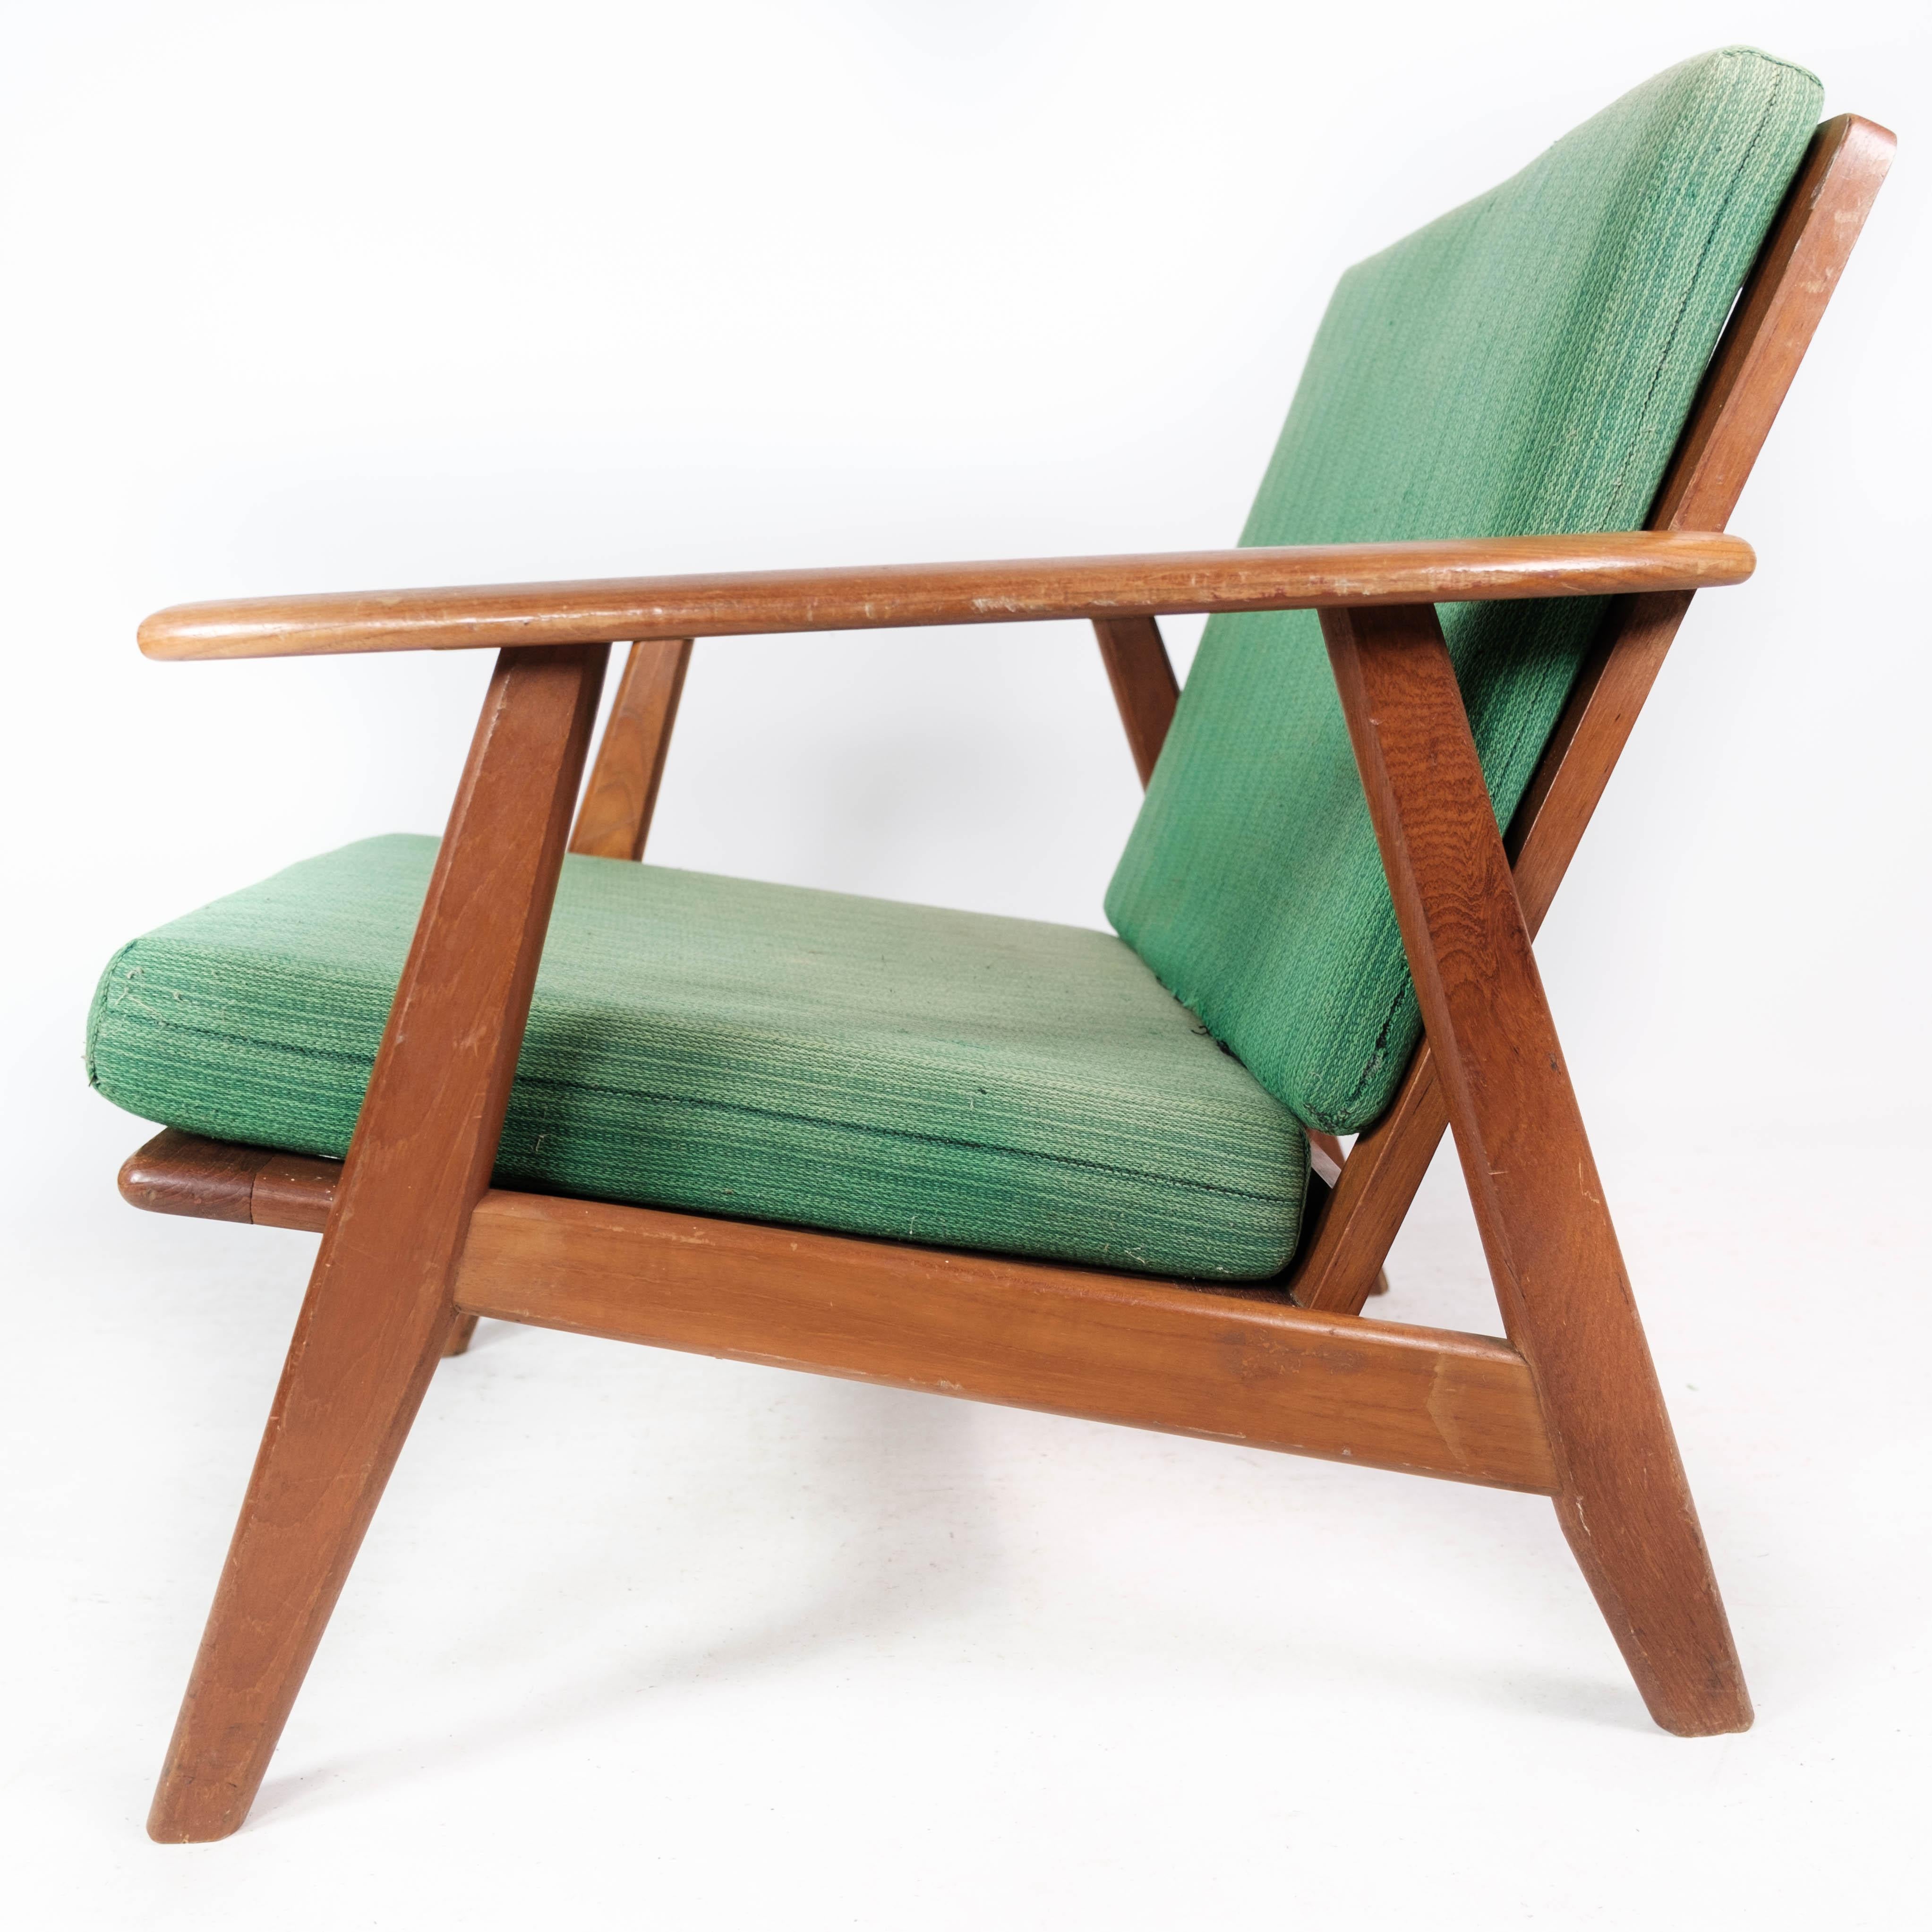 Mid-20th Century Easy Chair in Teak and with Green Upholstery of Danish Design from the 1960s For Sale